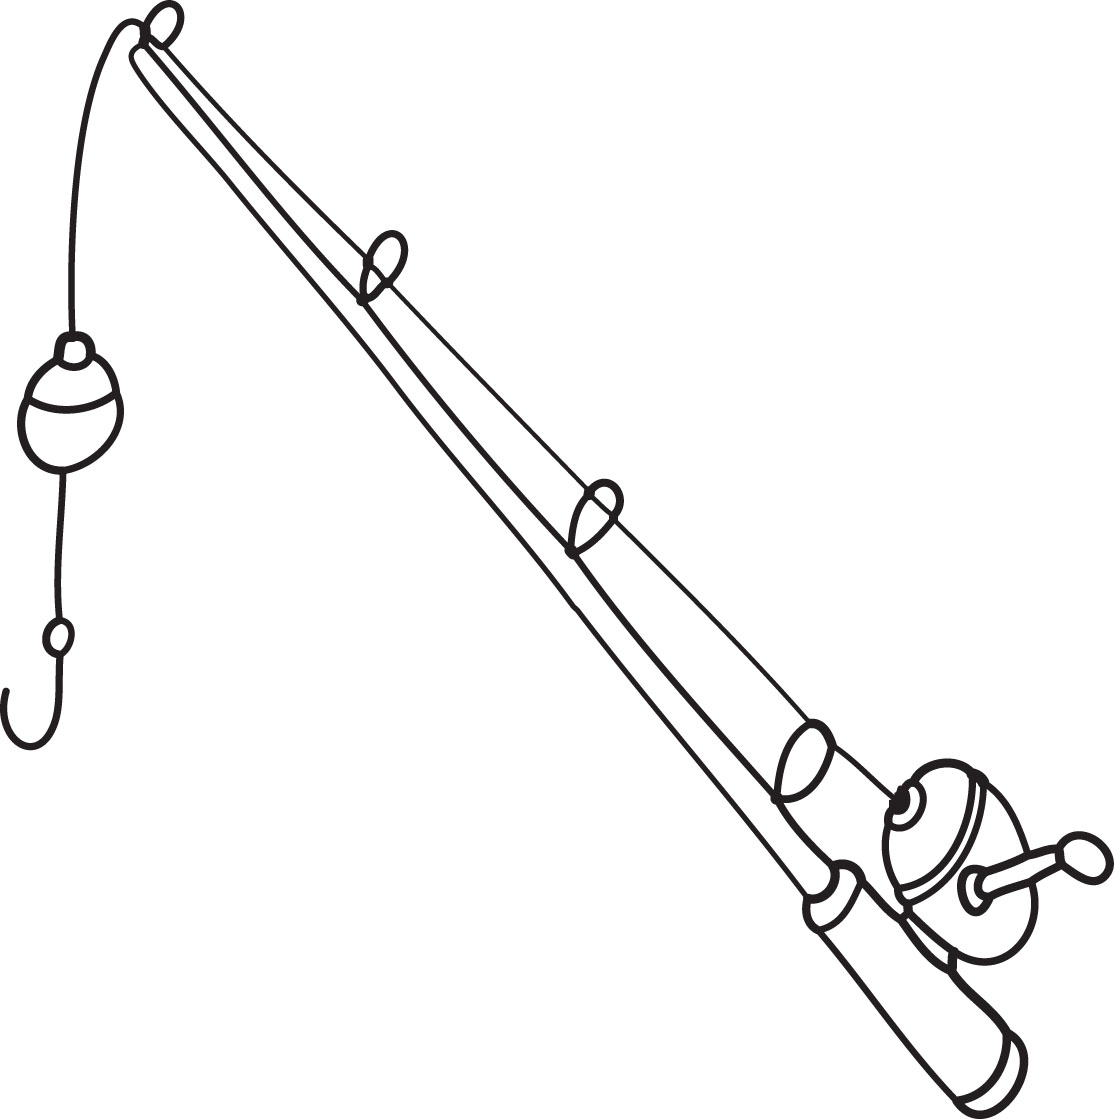 Free Fishing Pole Clipart Black And White, Download Free Fishing Pole